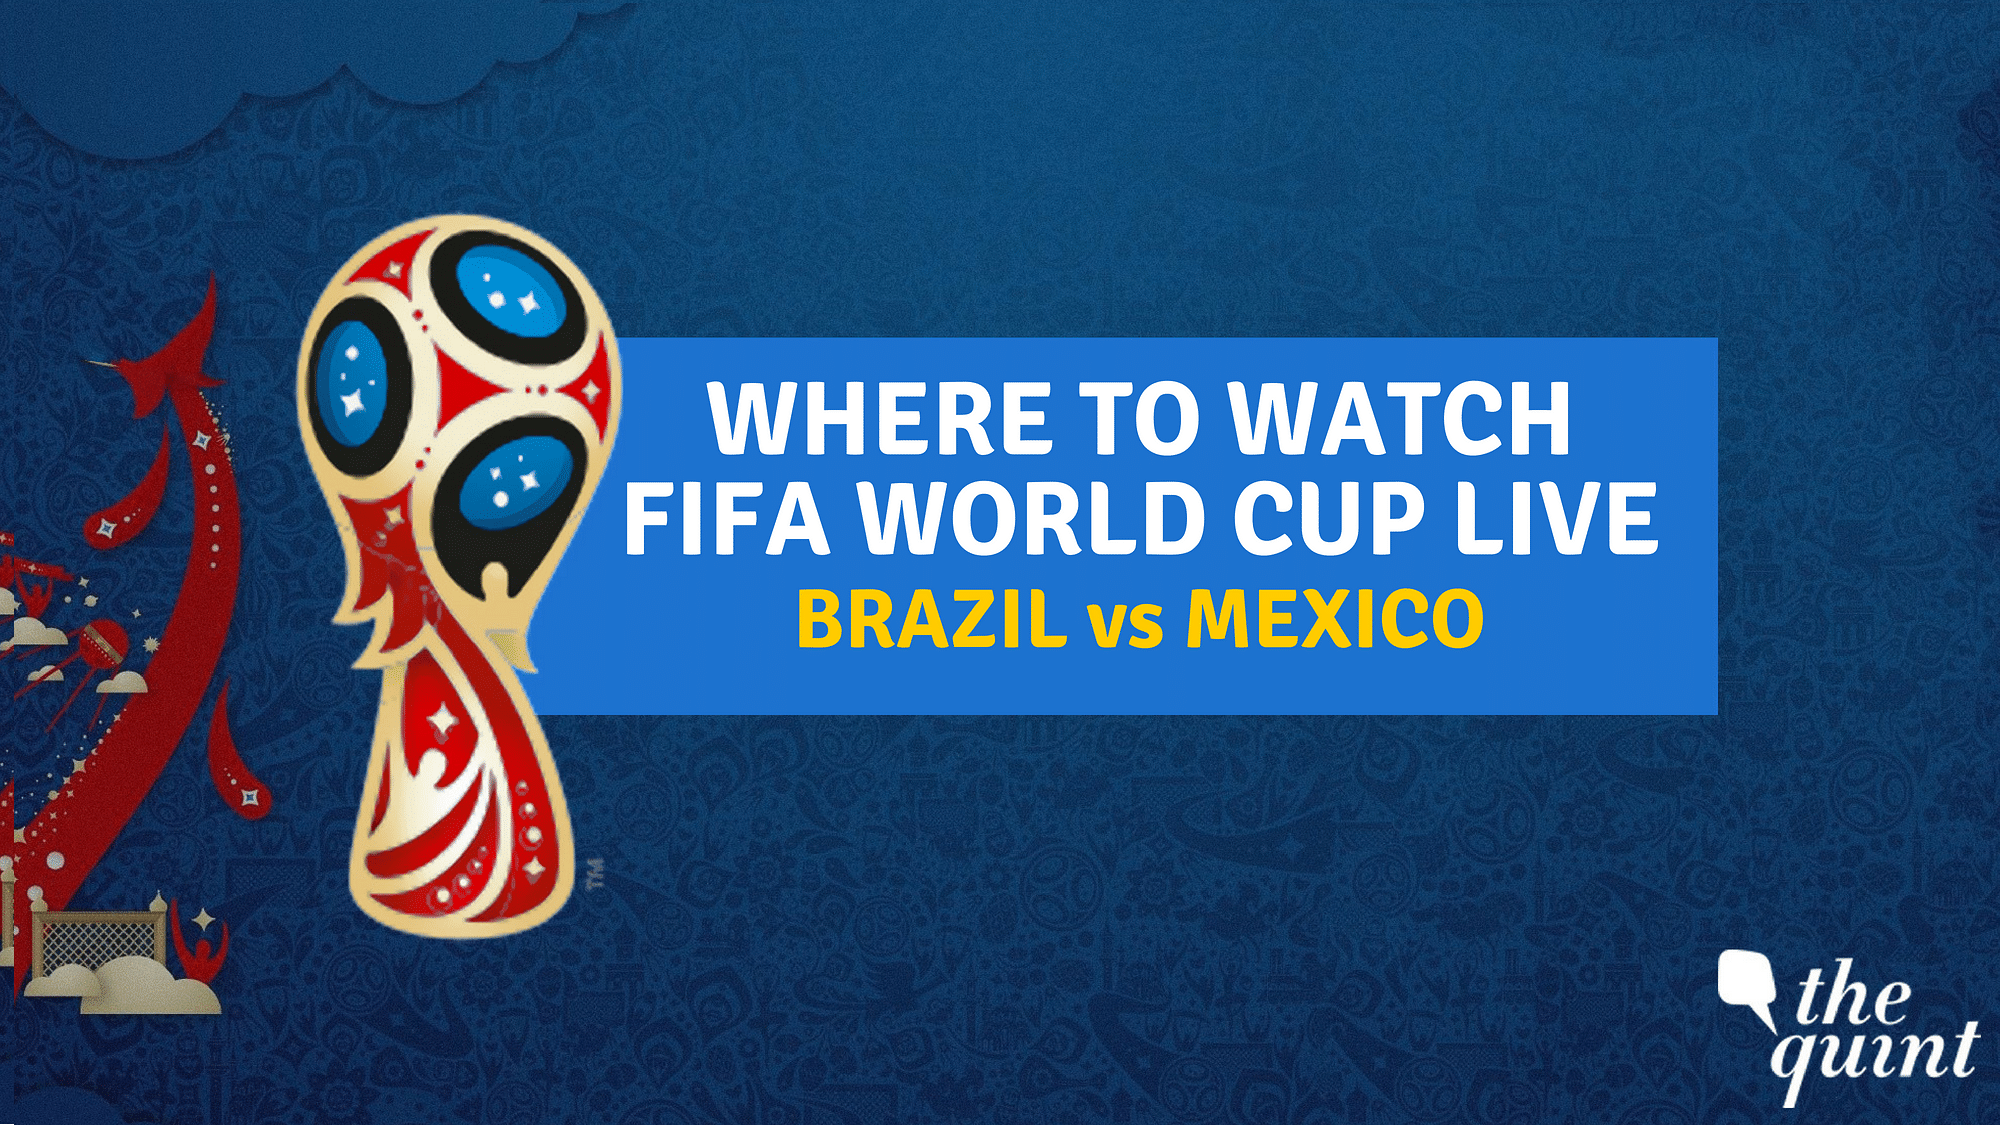 Brazil vs Mexico FIFA World Cup 2018 LIVE: Watch Online ...